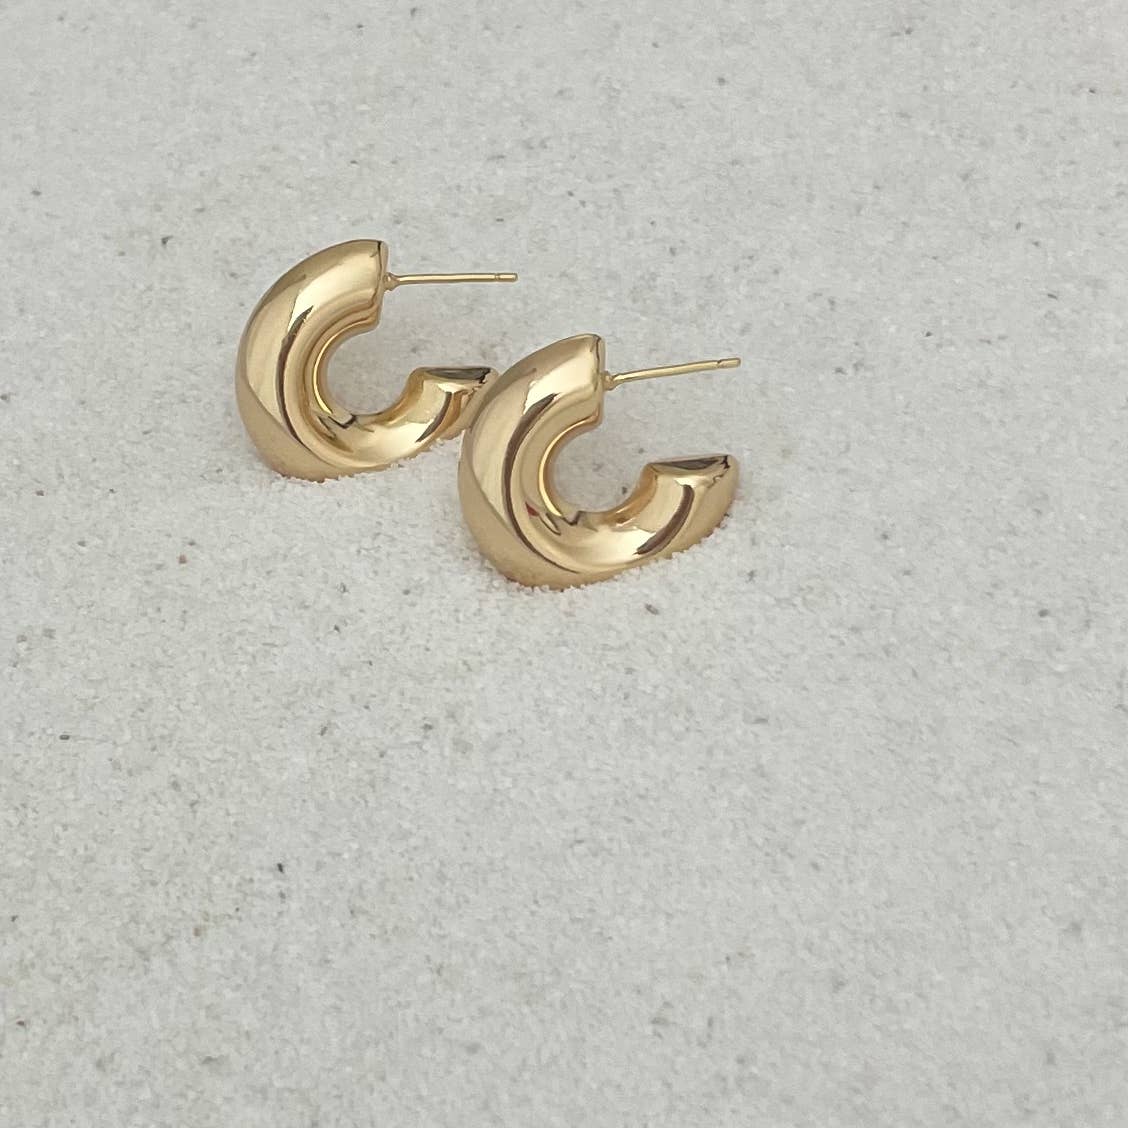 Hot Stuff - Thick Gold Filled Hoops